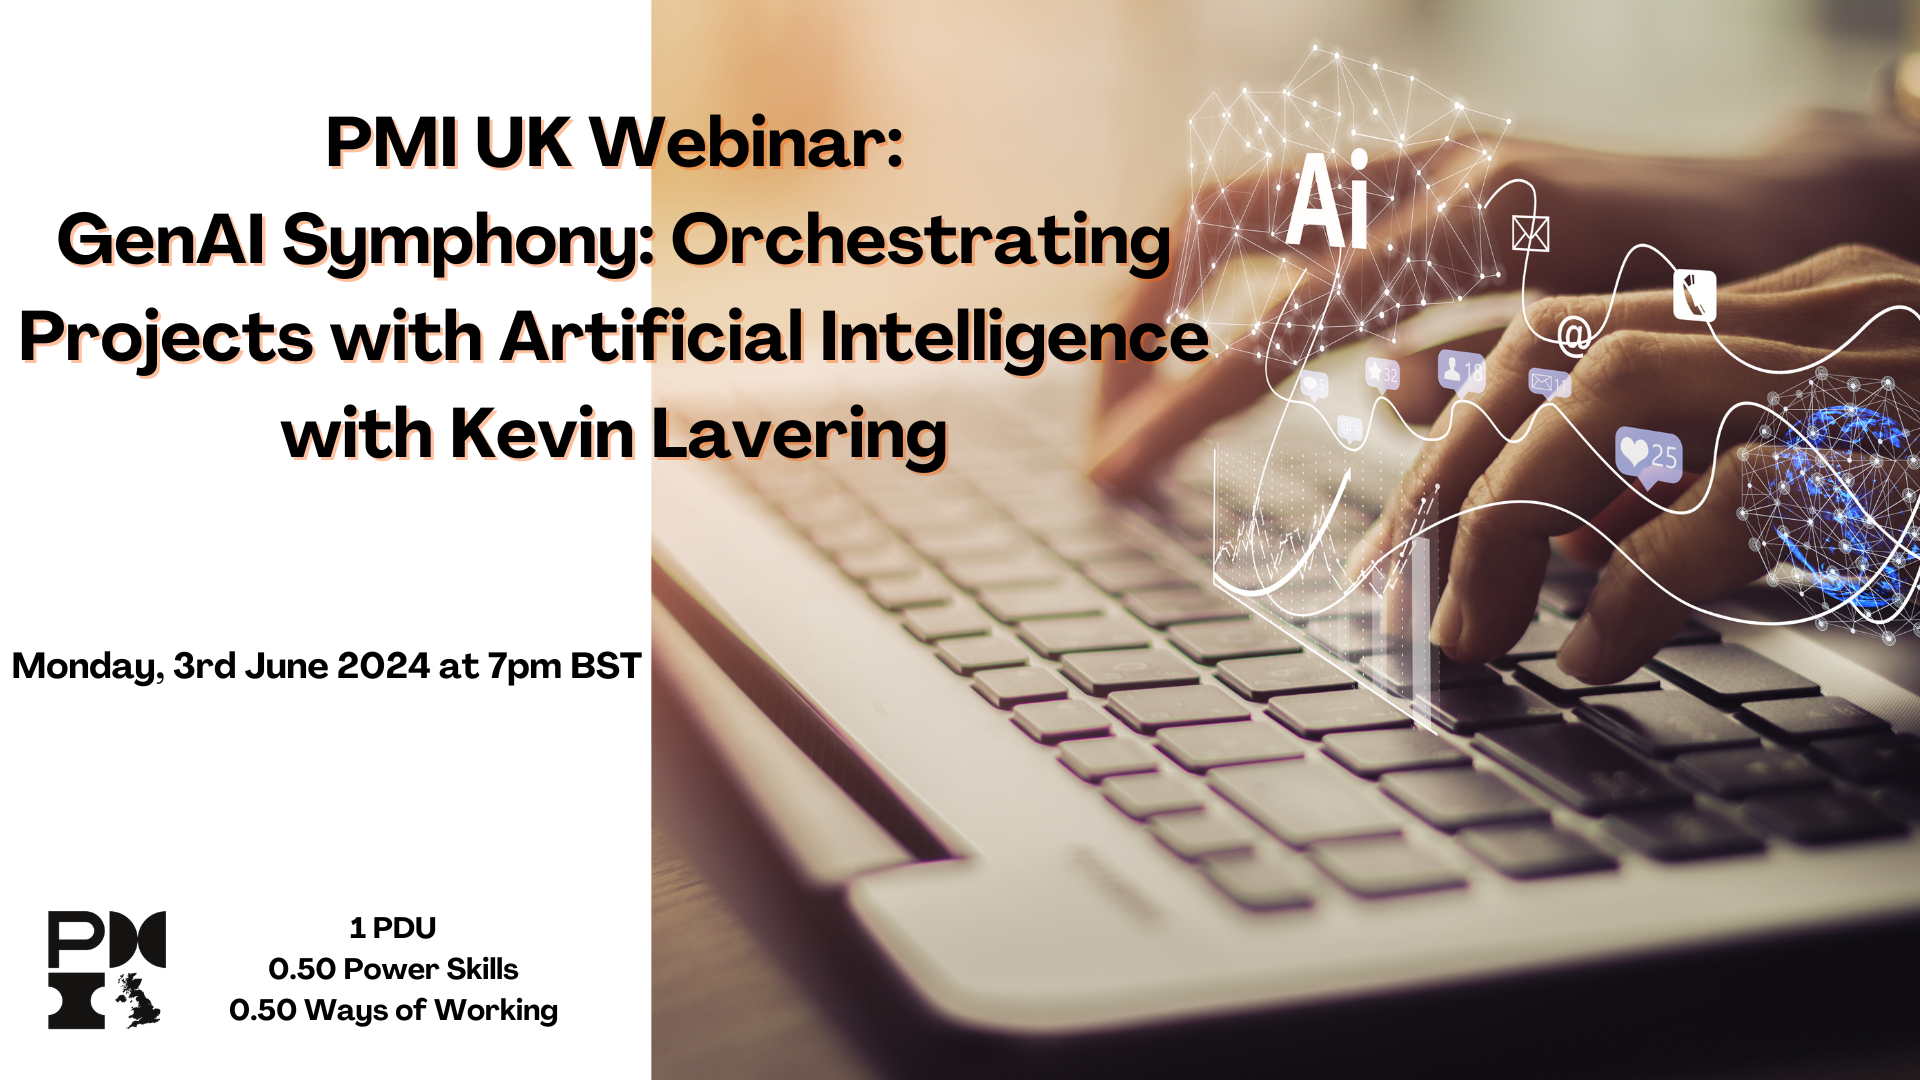 PMI UK Webinar: GenAI Symphony: Orchestrating Projects with Artificial Intelligence. 3rd June 2024